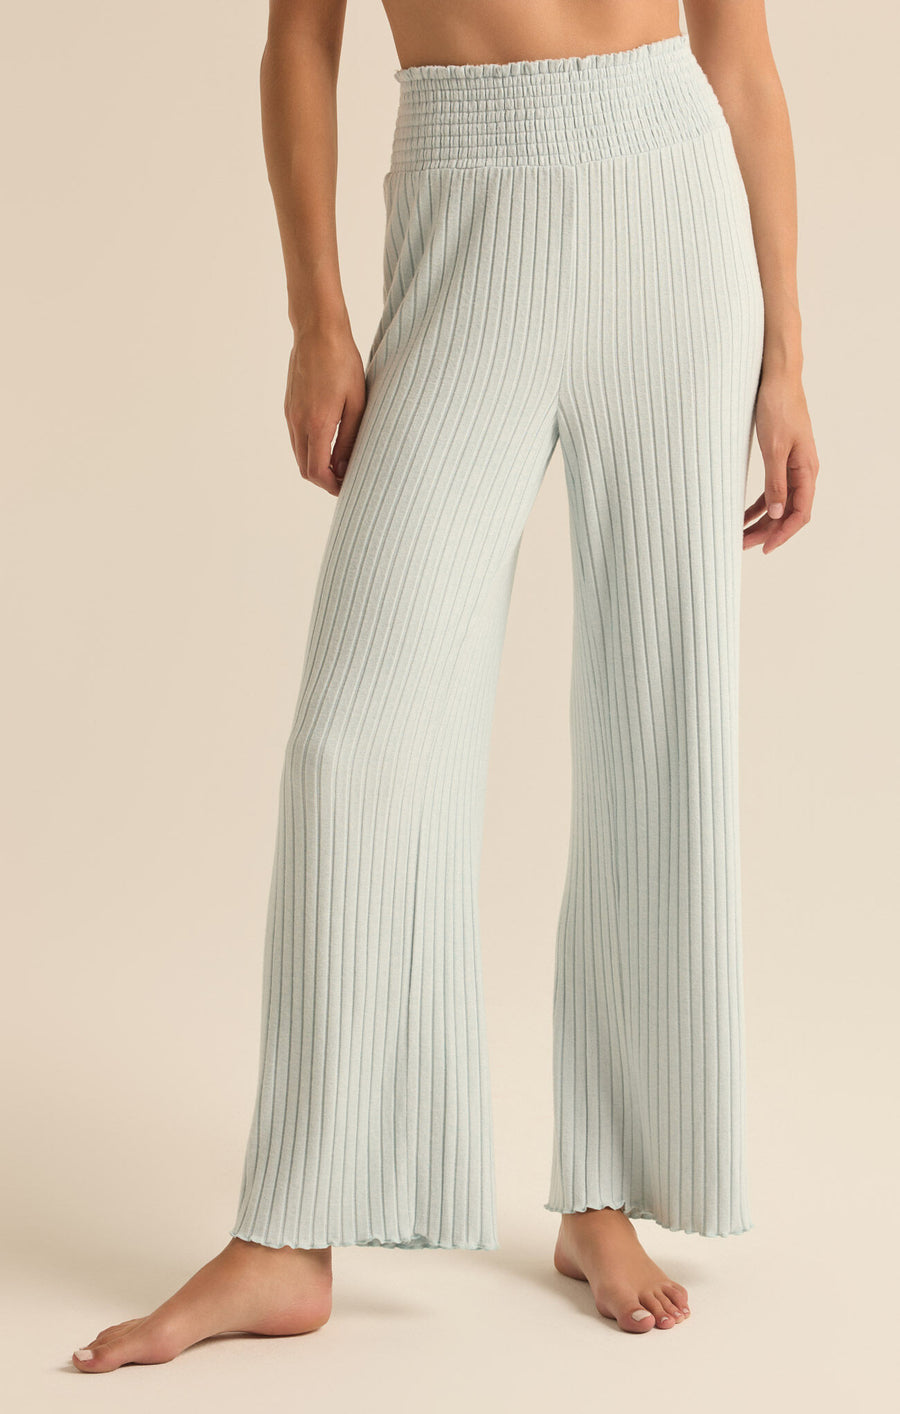 Featuring a Lounge pants with a thick ruched waist band in the color snow flke blue 